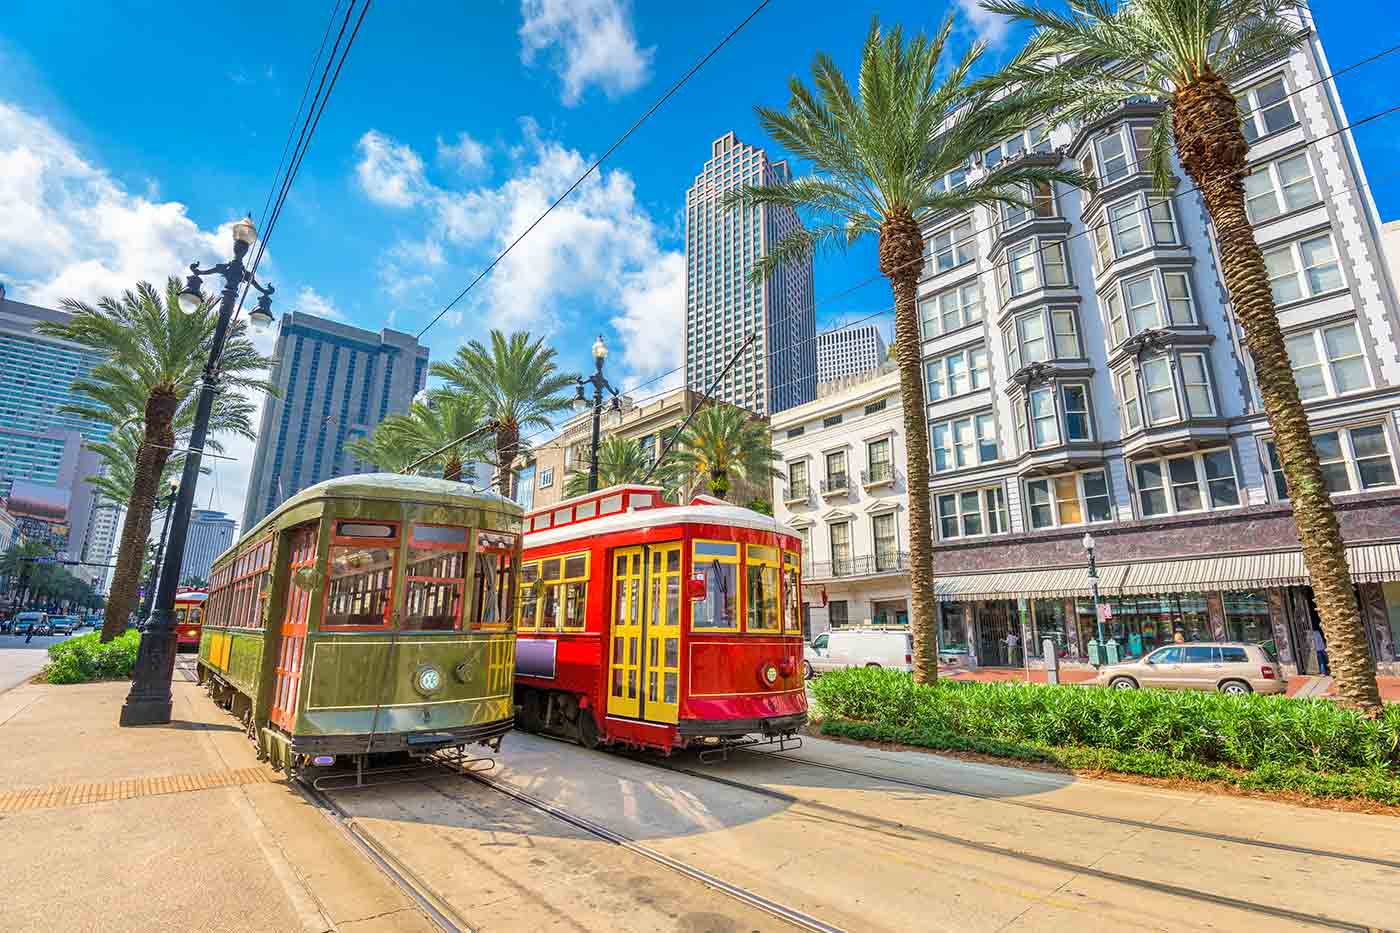 40 Things to Do in New Orleans, LA - Fun Tourist Places in NOLA